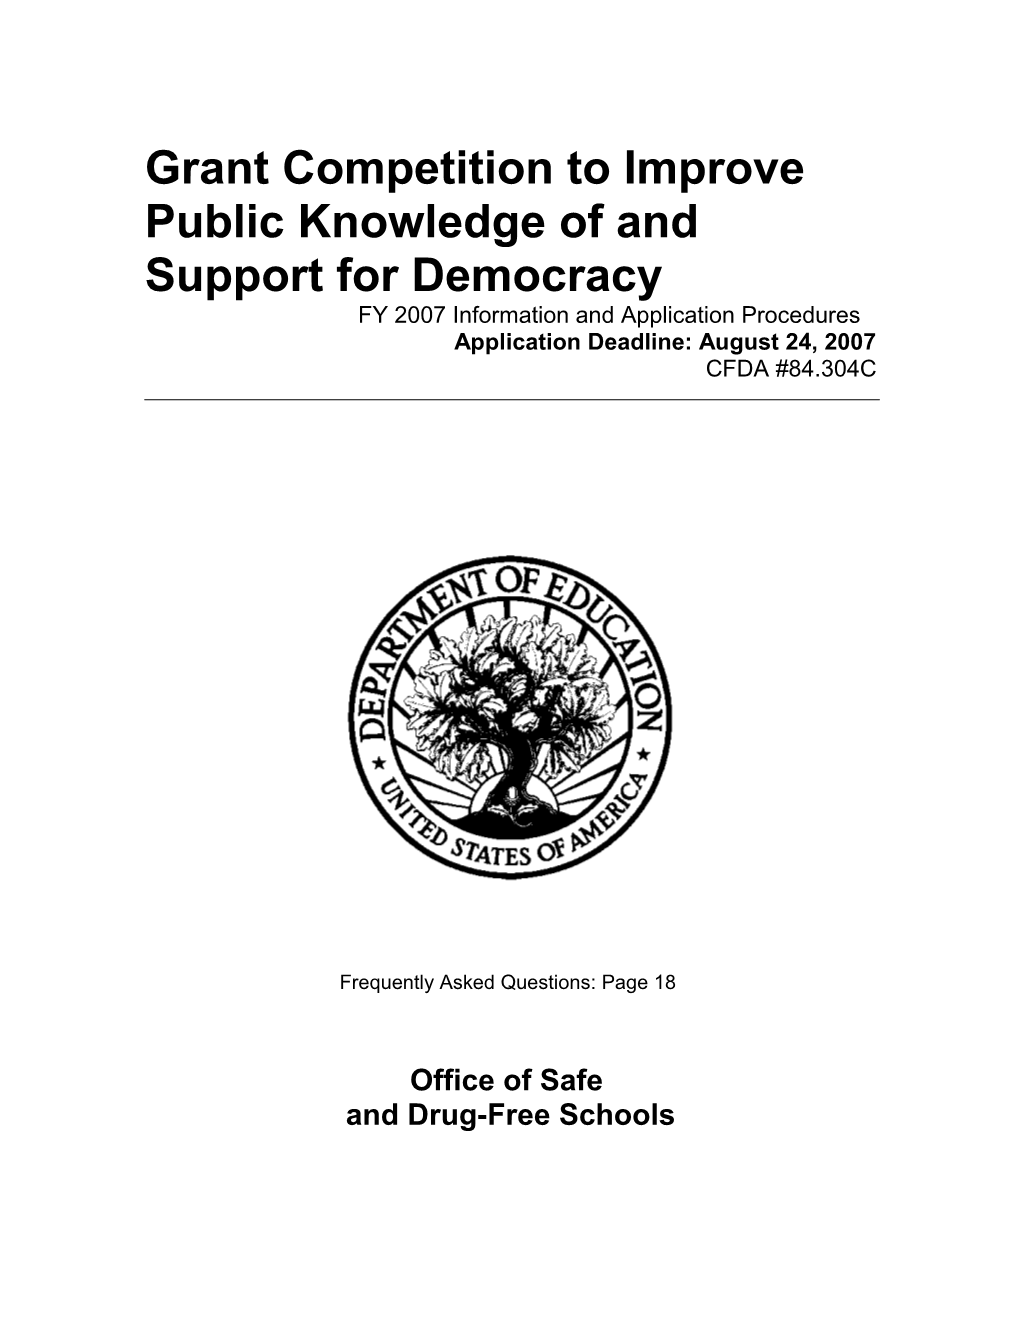 Grant Competition to Improve Public Knowledge of and Support for Democracy (MS WORD)